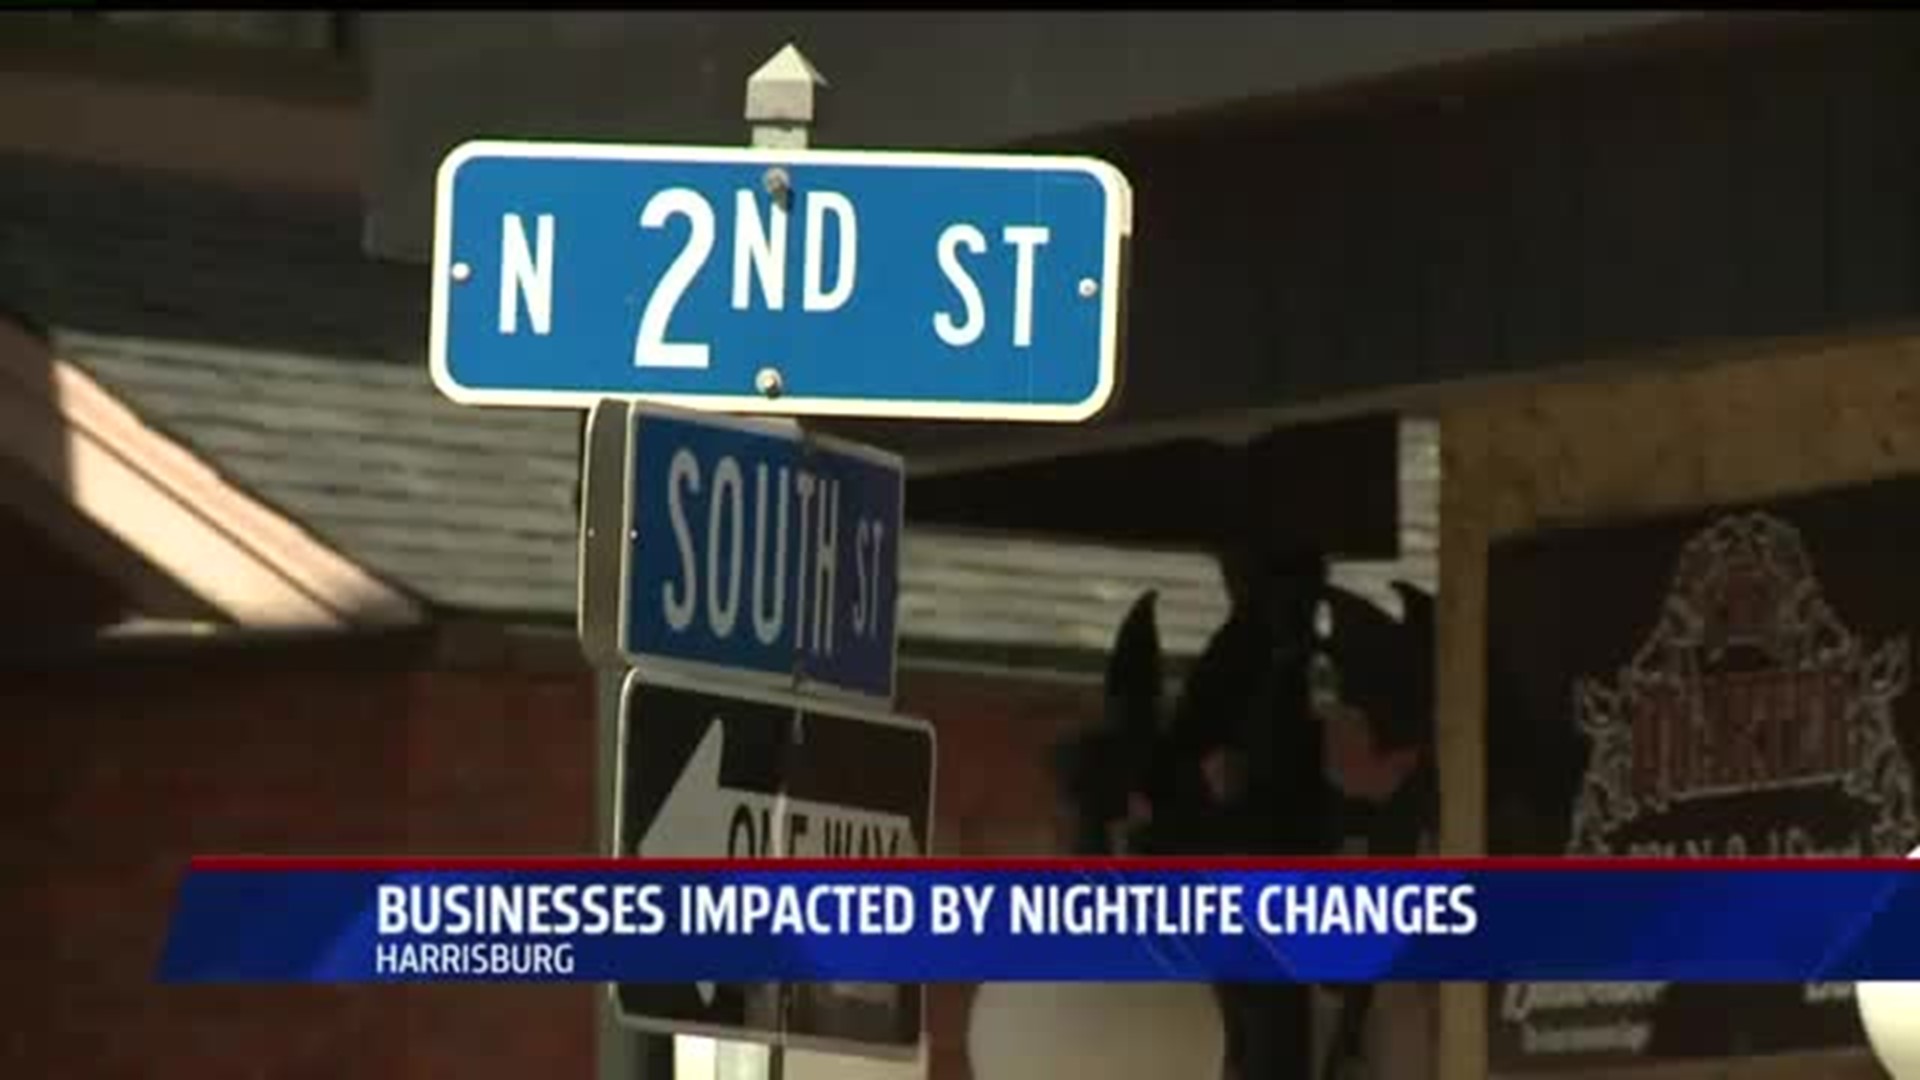 Businesses impacted by nightlife changes